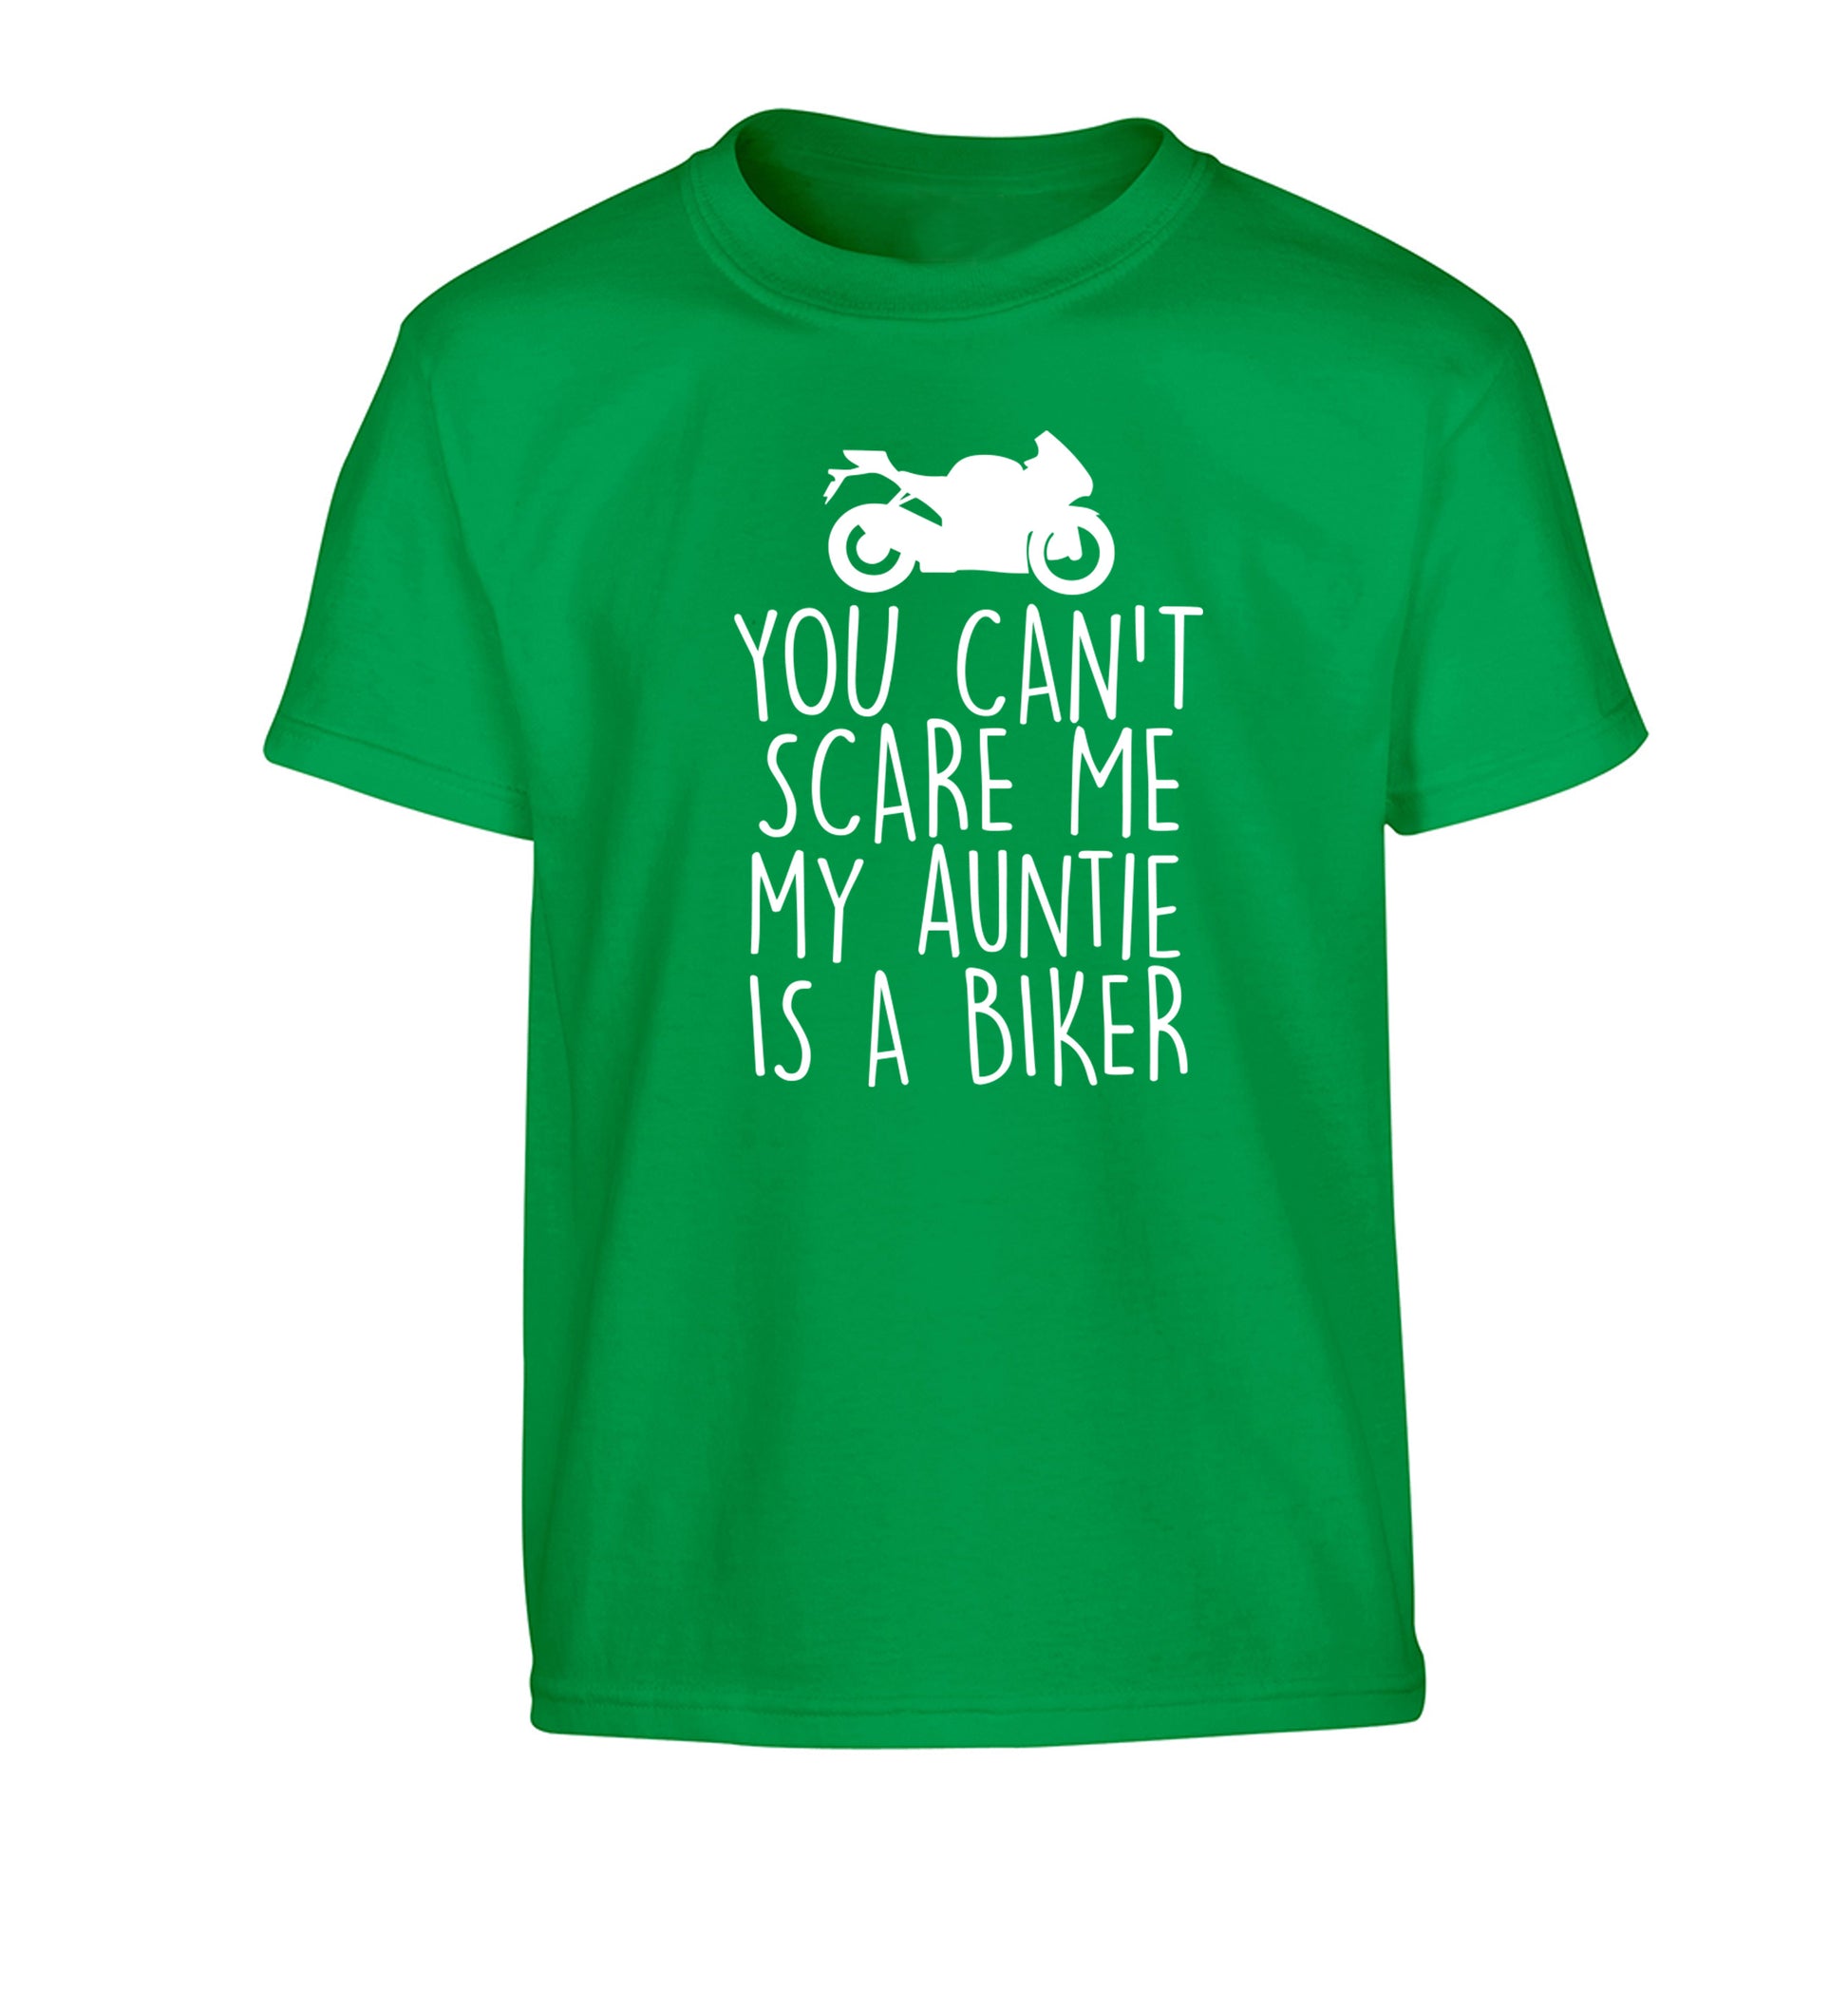 You can't scare me my auntie is a biker Children's green Tshirt 12-13 Years